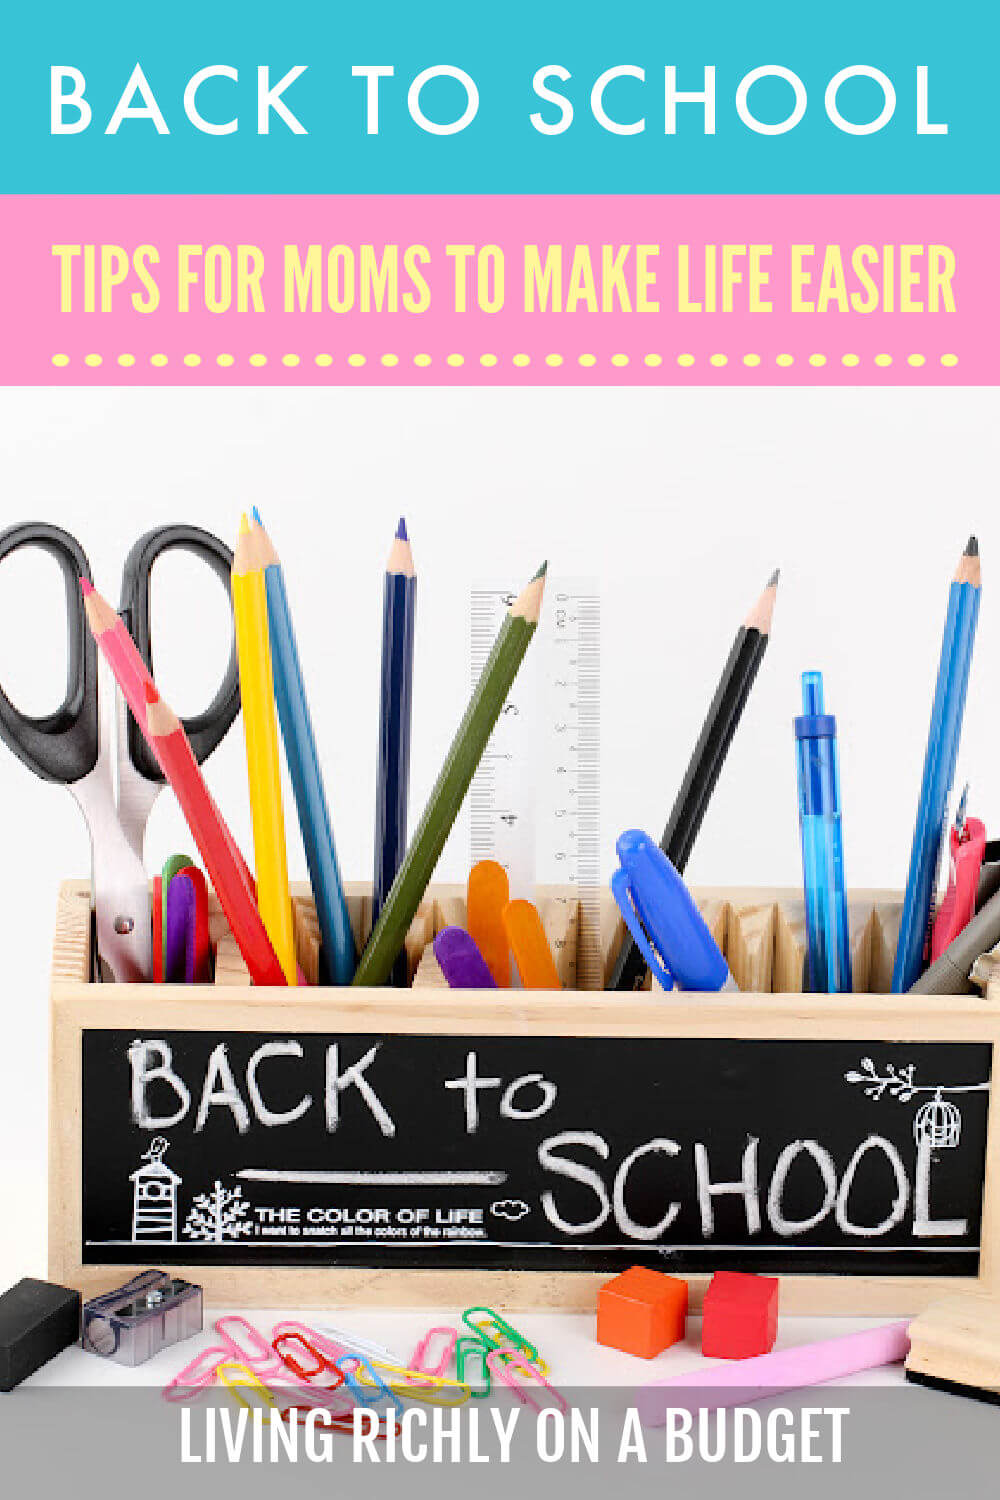 Back to School tips for moms